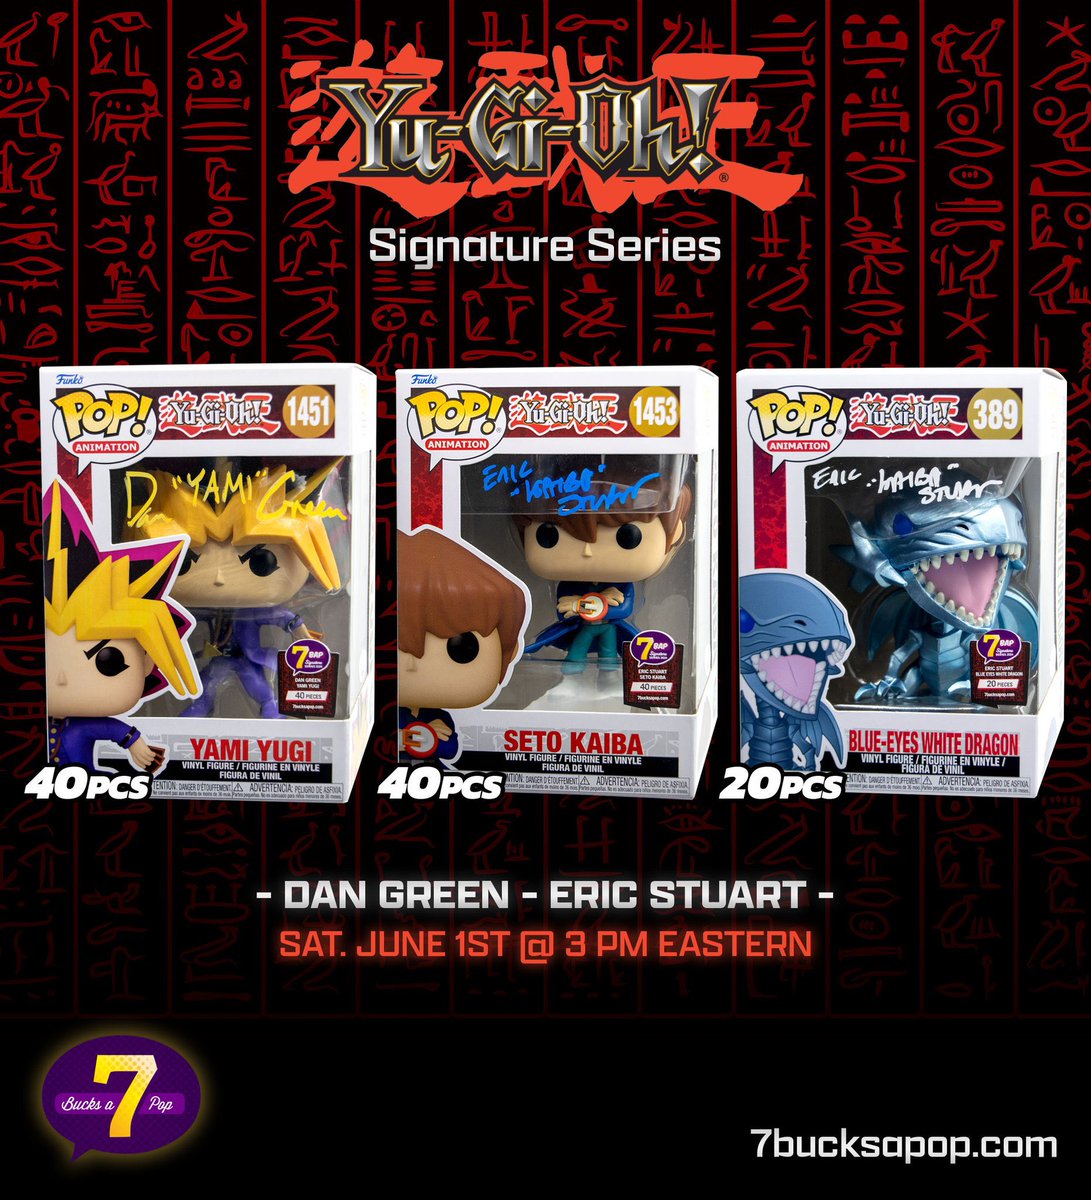 The #7BAPSignatureSeries is excited to bring you autographed Funko Pops of Dan Green & Eric Stuart from Yu-Gi-Oh on Saturday June 1st @ 3pm Eastern. #Ad #YuGiOh Dan Green as Yami Yugi (40pcs) $90 + shipping. Eric Stuart as Seto Kaiba (40pcs) or Blue-Eyes White Dragon (20pcs) -